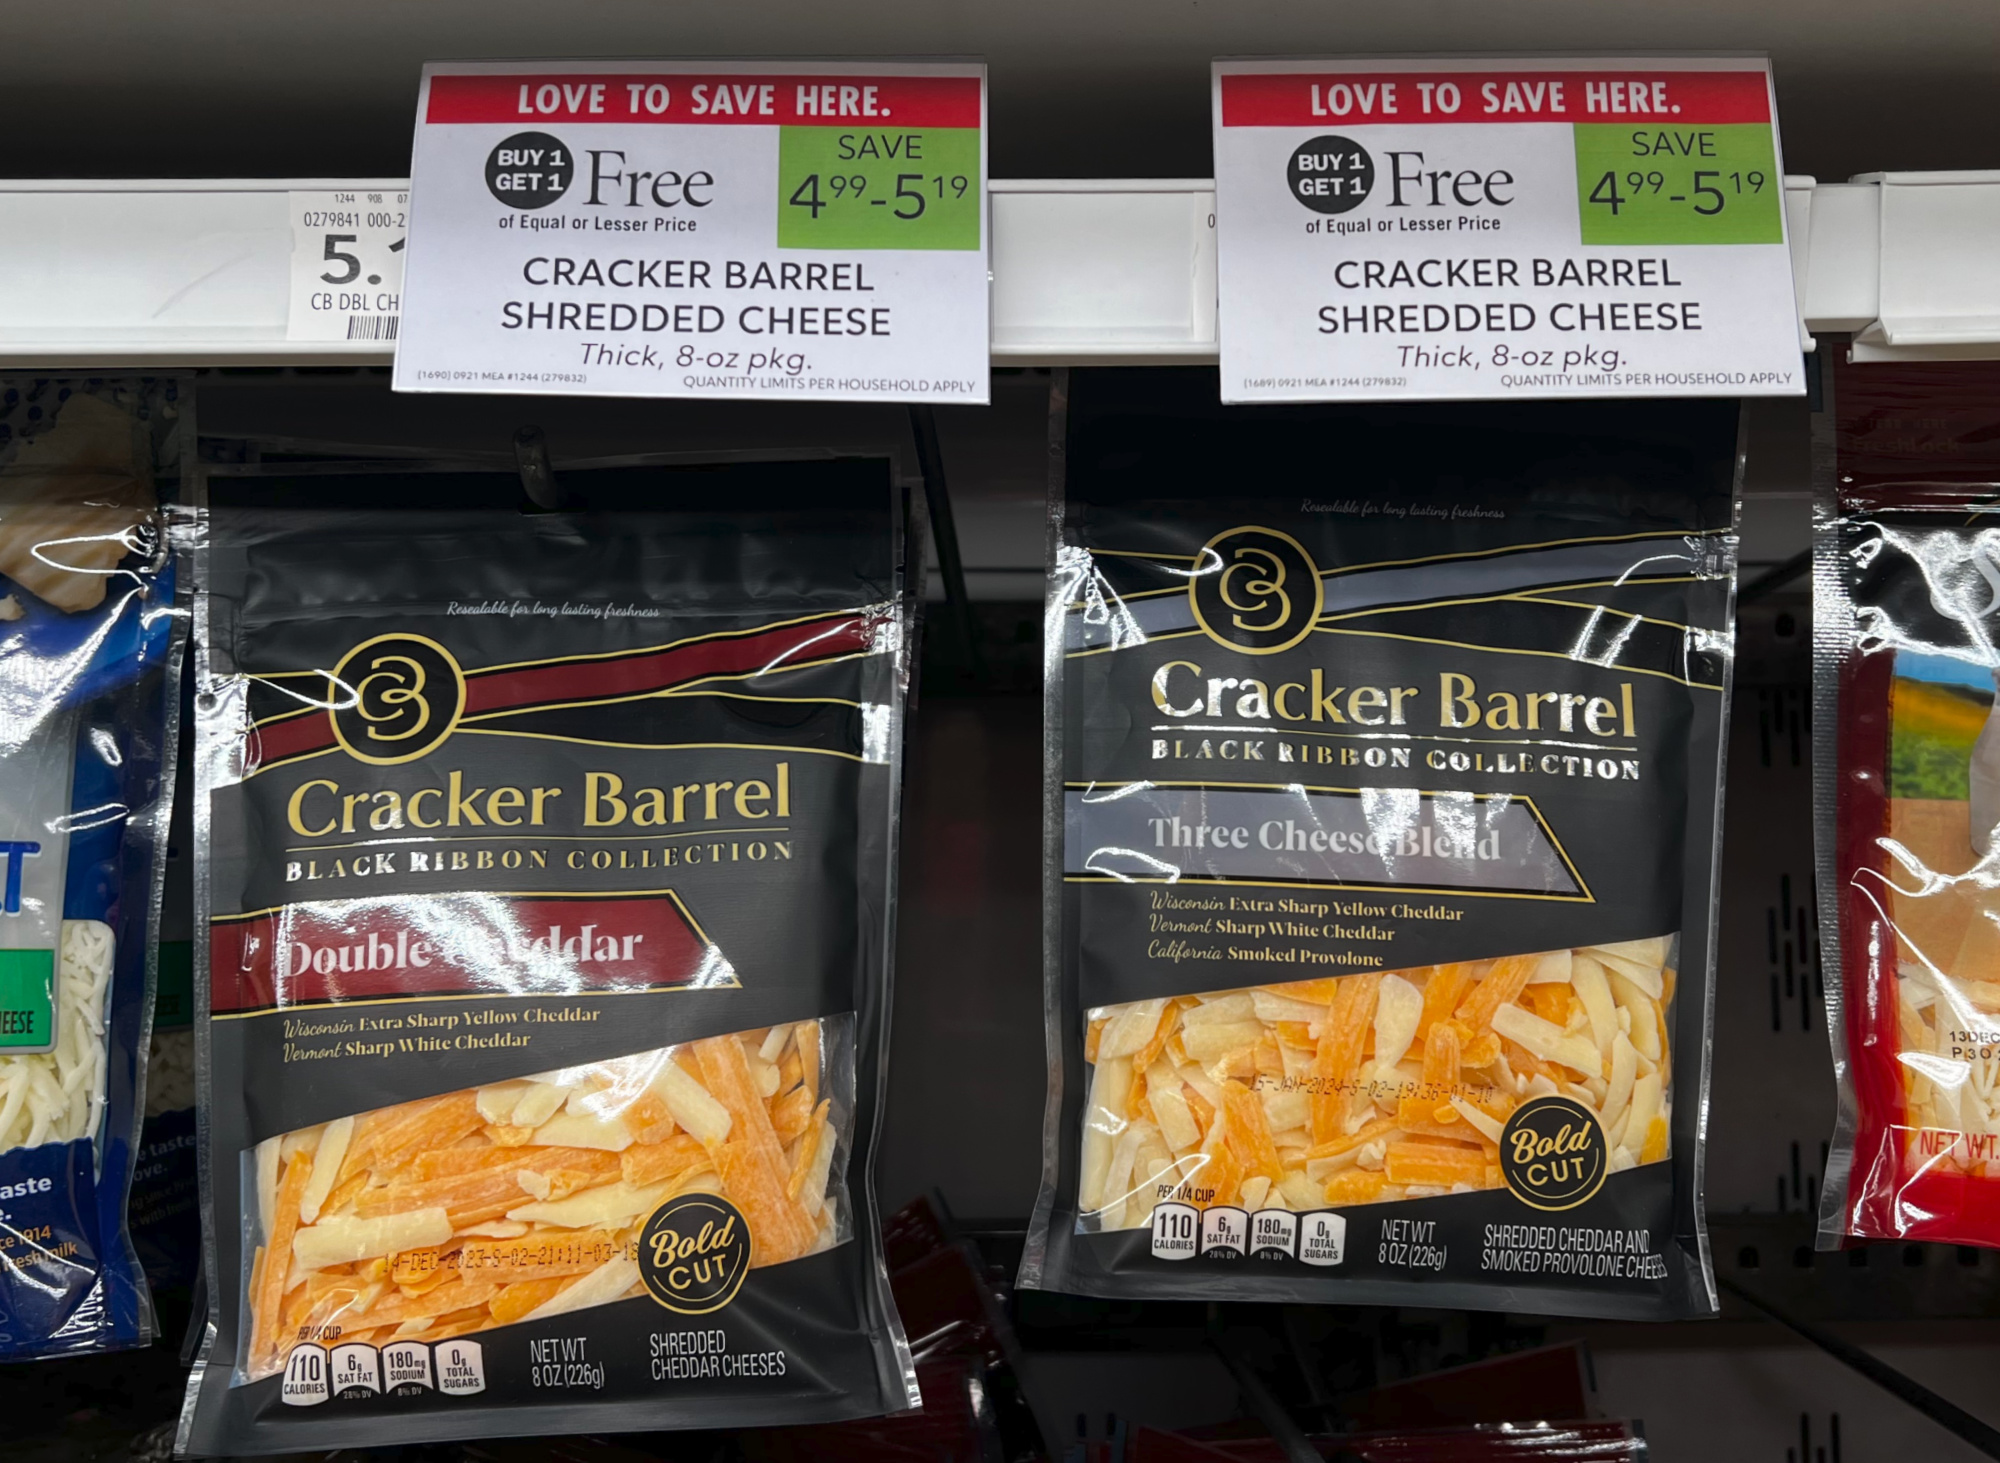 Cracker Barrel Shredded Cheese As Low As $2 At Publix - iHeartPublix